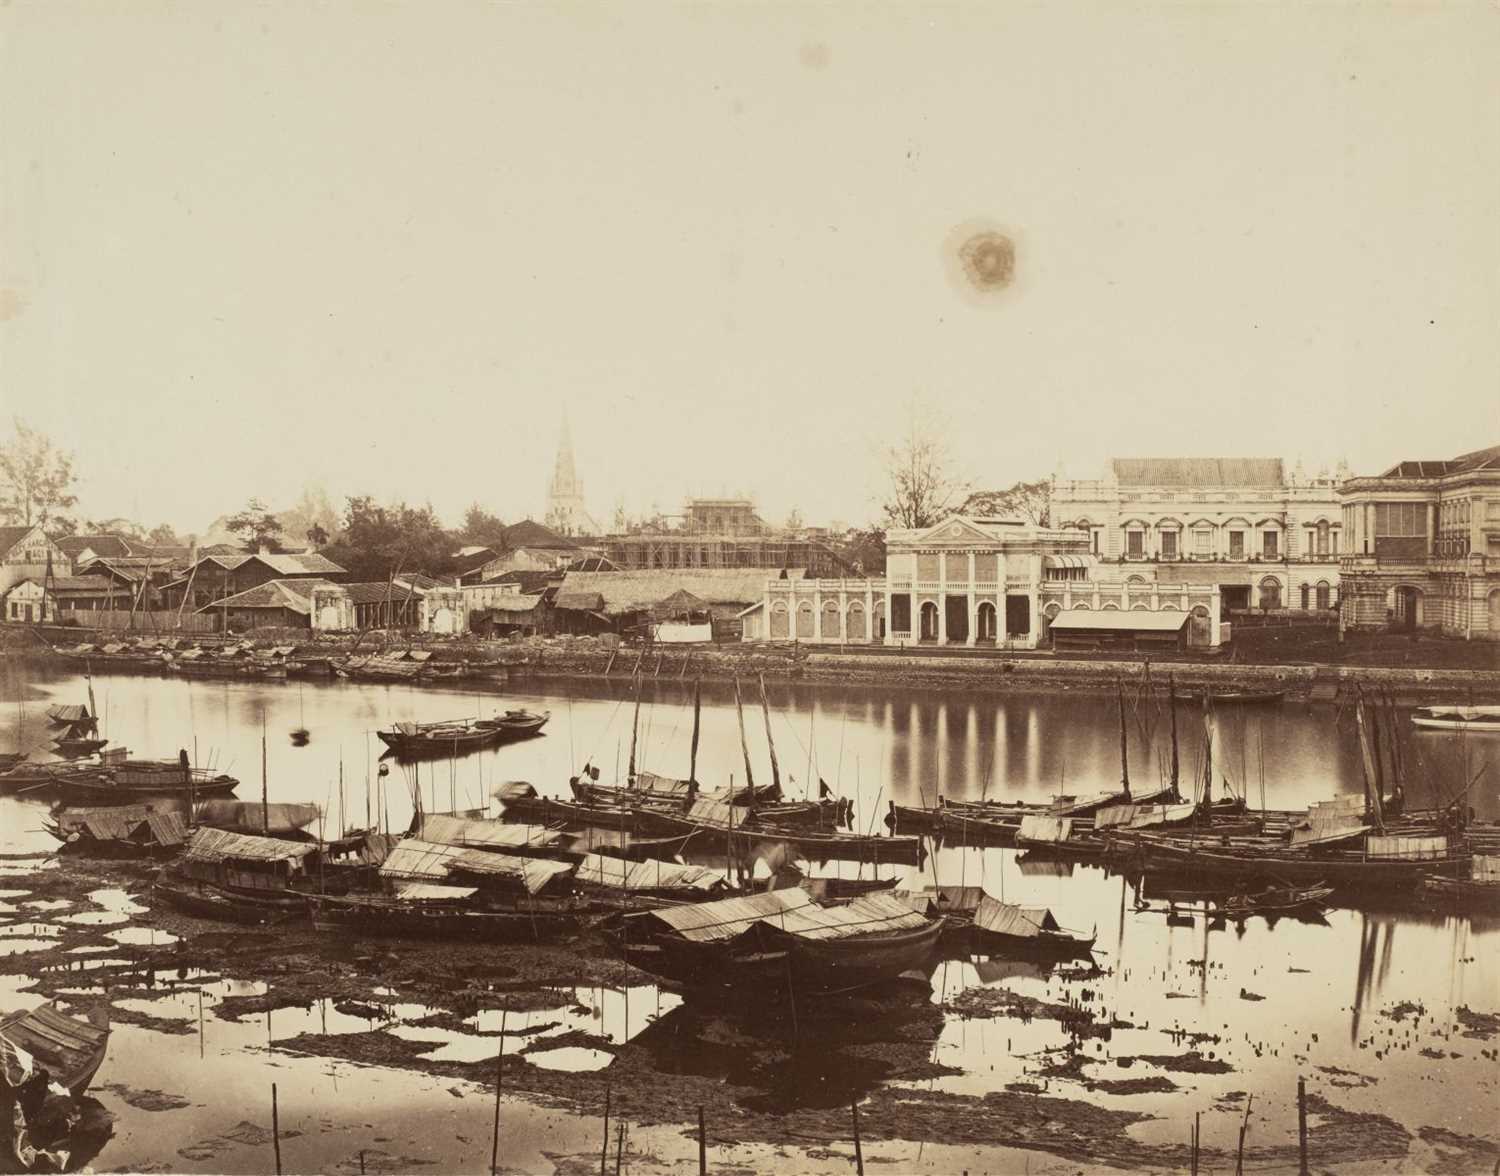 Lot 65 - Singapore. An early view of Singapore, attributed to August Sachtler, c. 1875